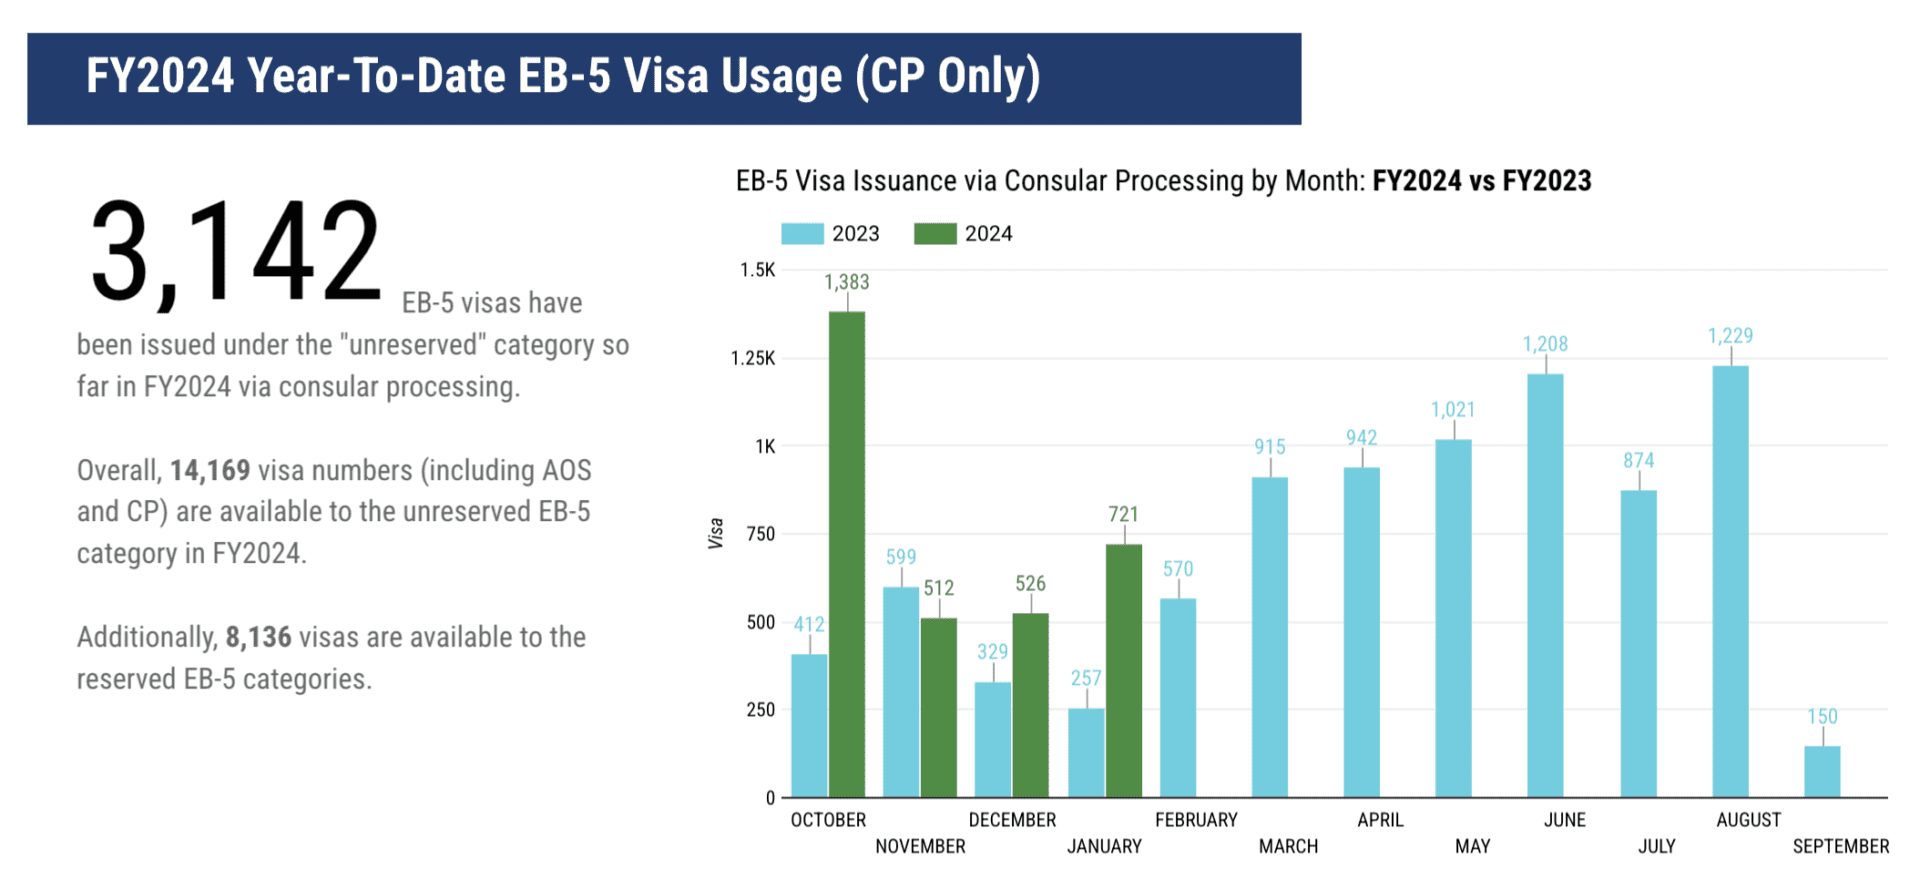 EB-5 Visa Issuance Continues to Grow in January – IIUSA Data Analysis on EB-5 Visa Issuance (October 2023 – January, 2024)